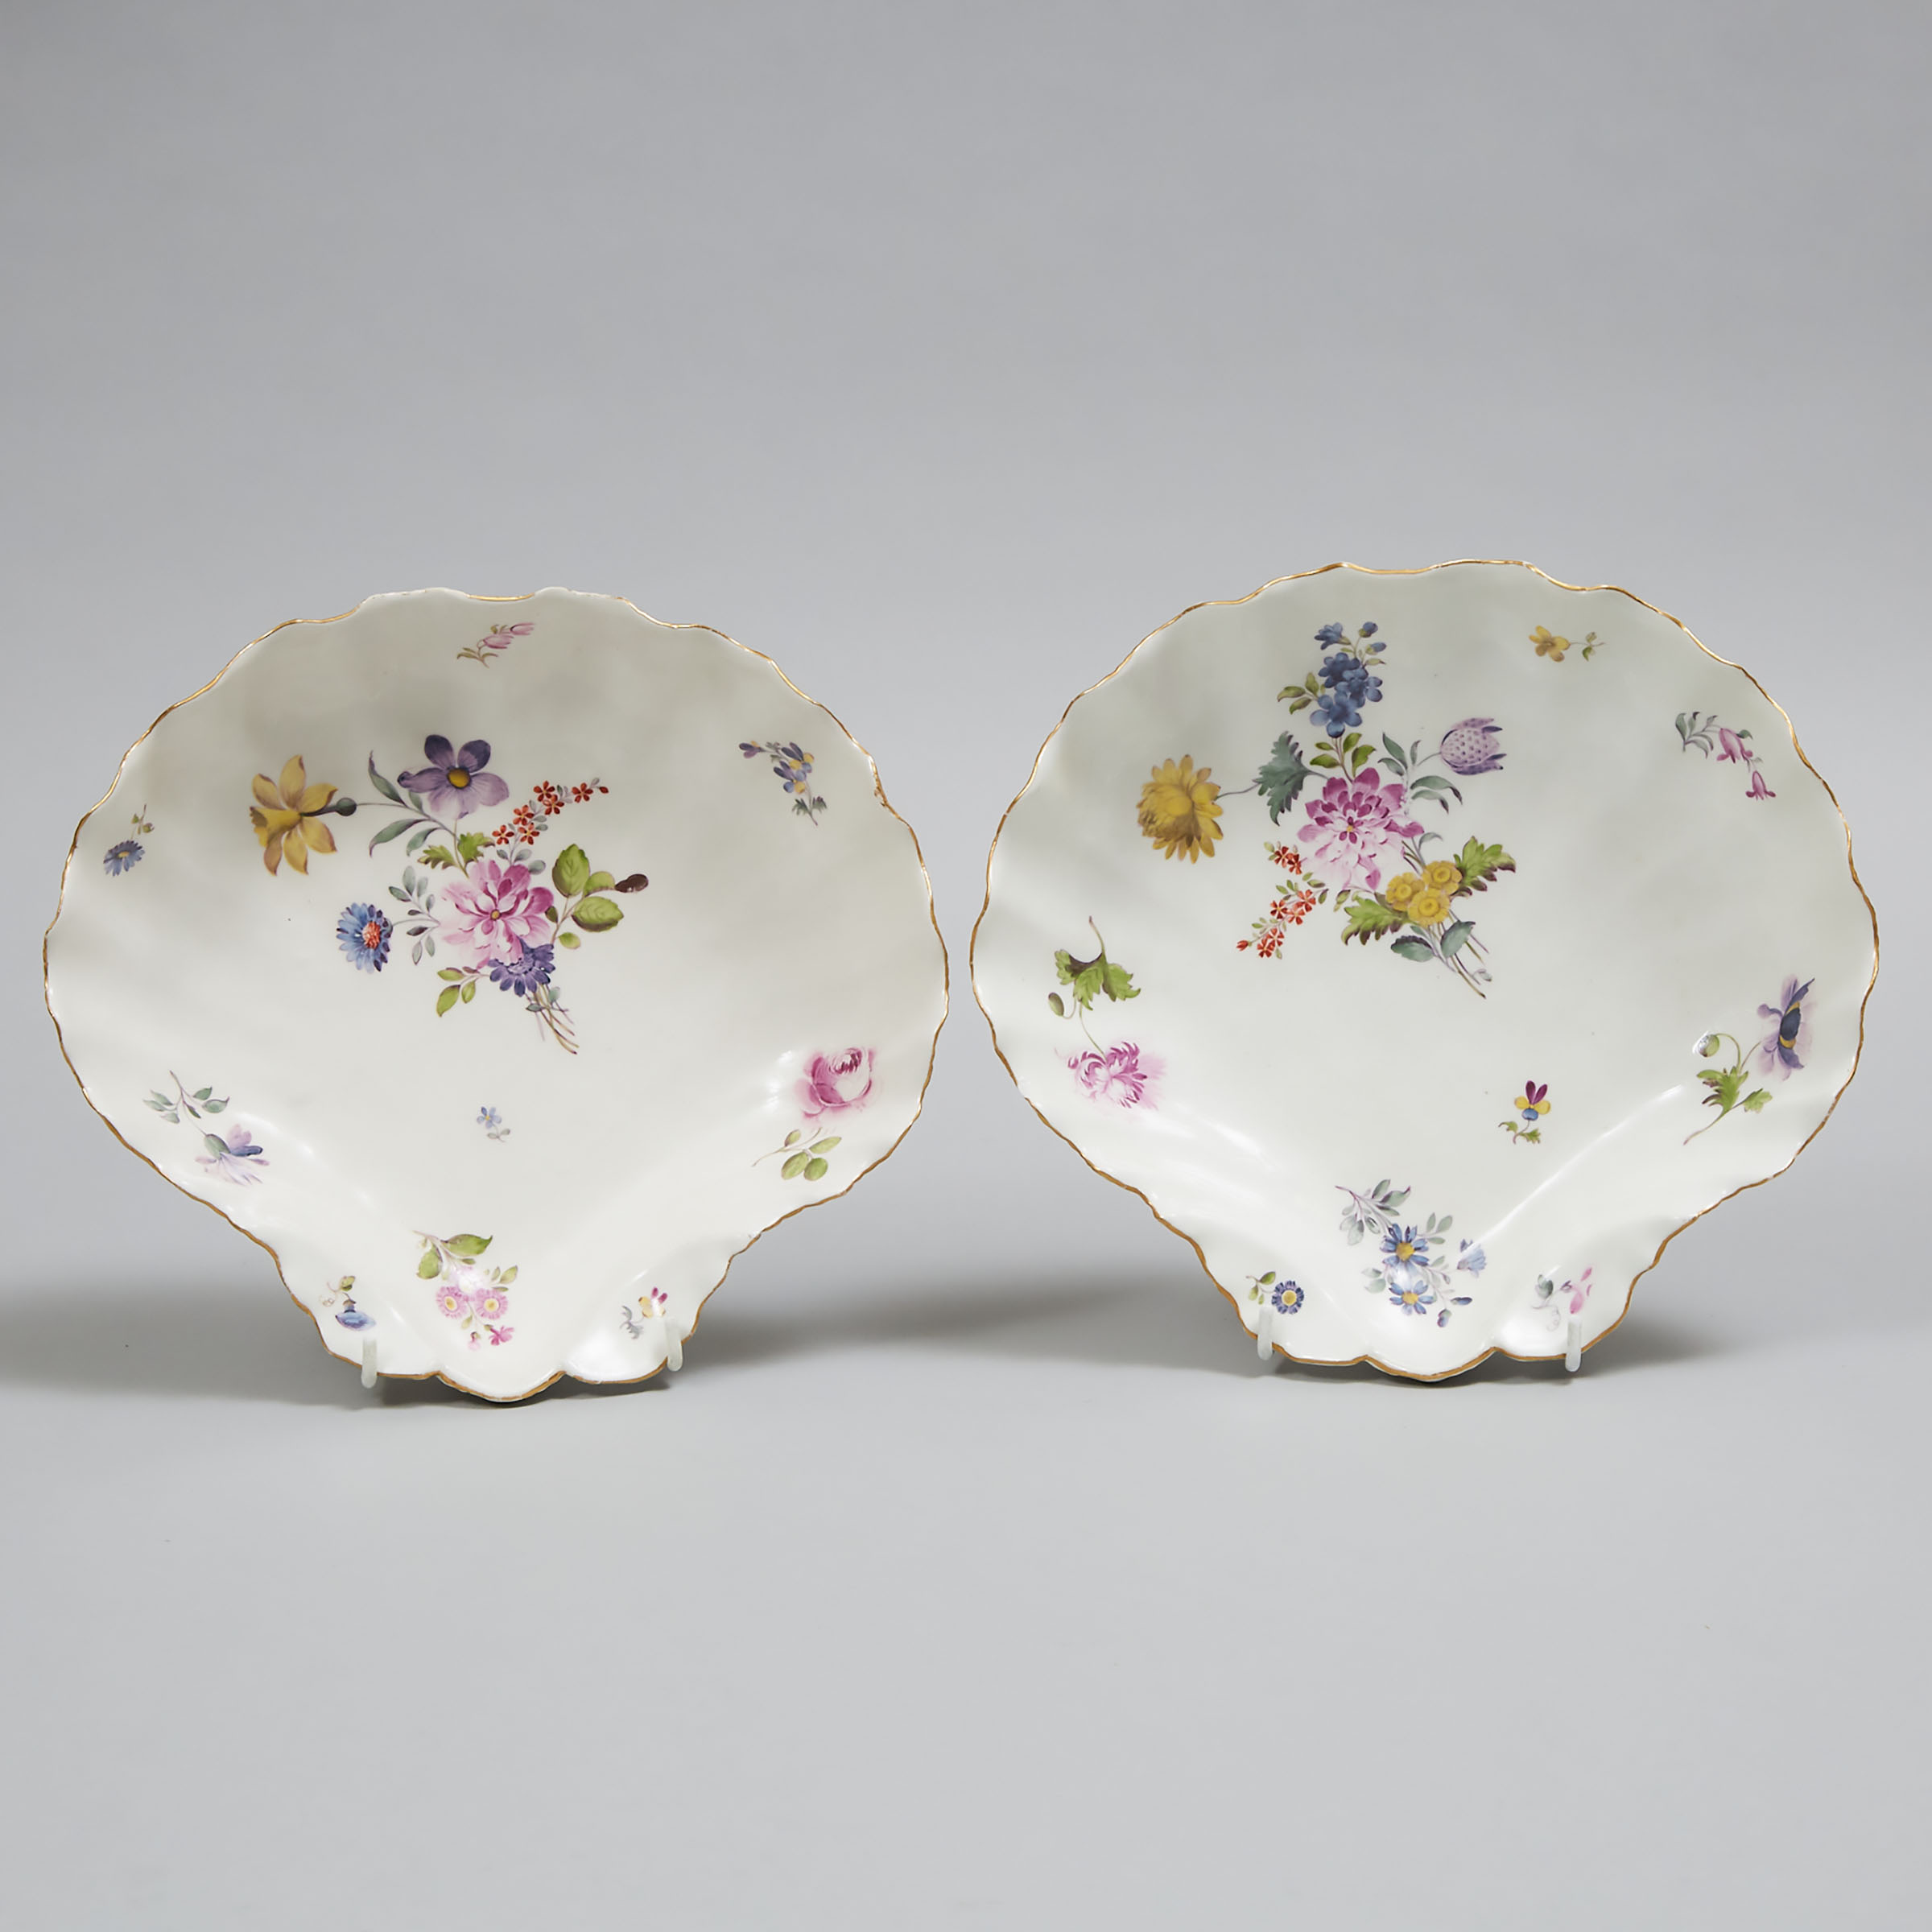 Pair of Meissen Moulded and Flower Painted Shell Dishes, 18th century